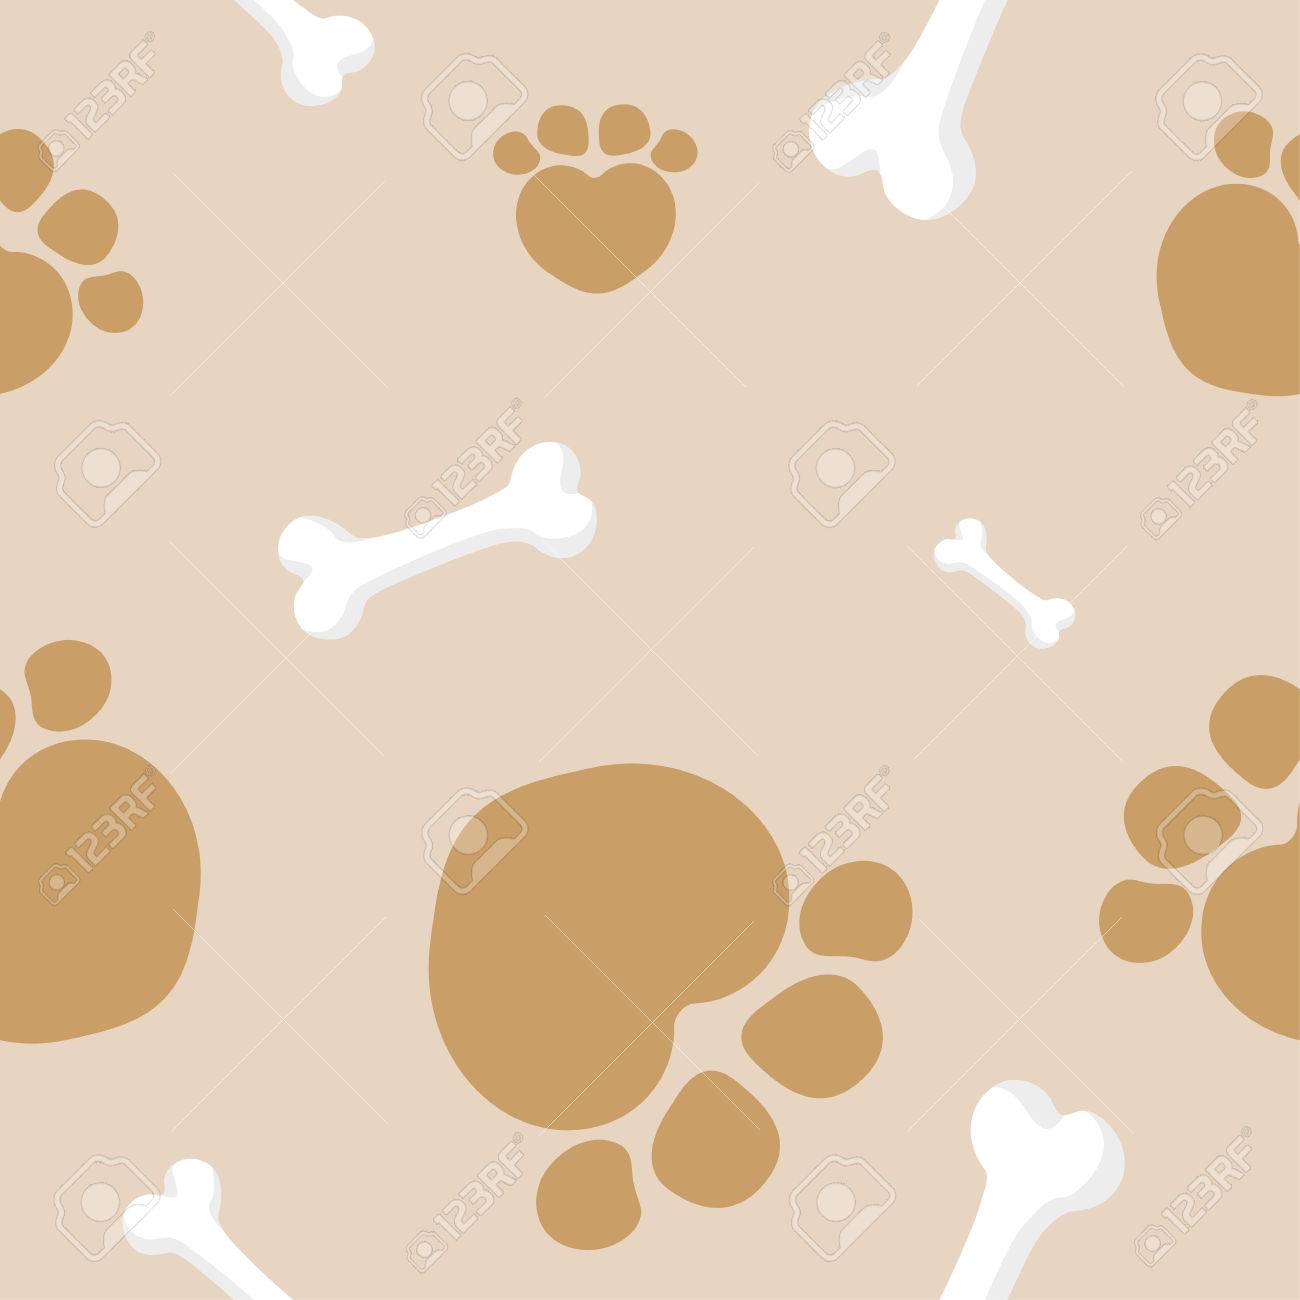 Illustration Background Wallpaper With Paws Of Pets And Dog